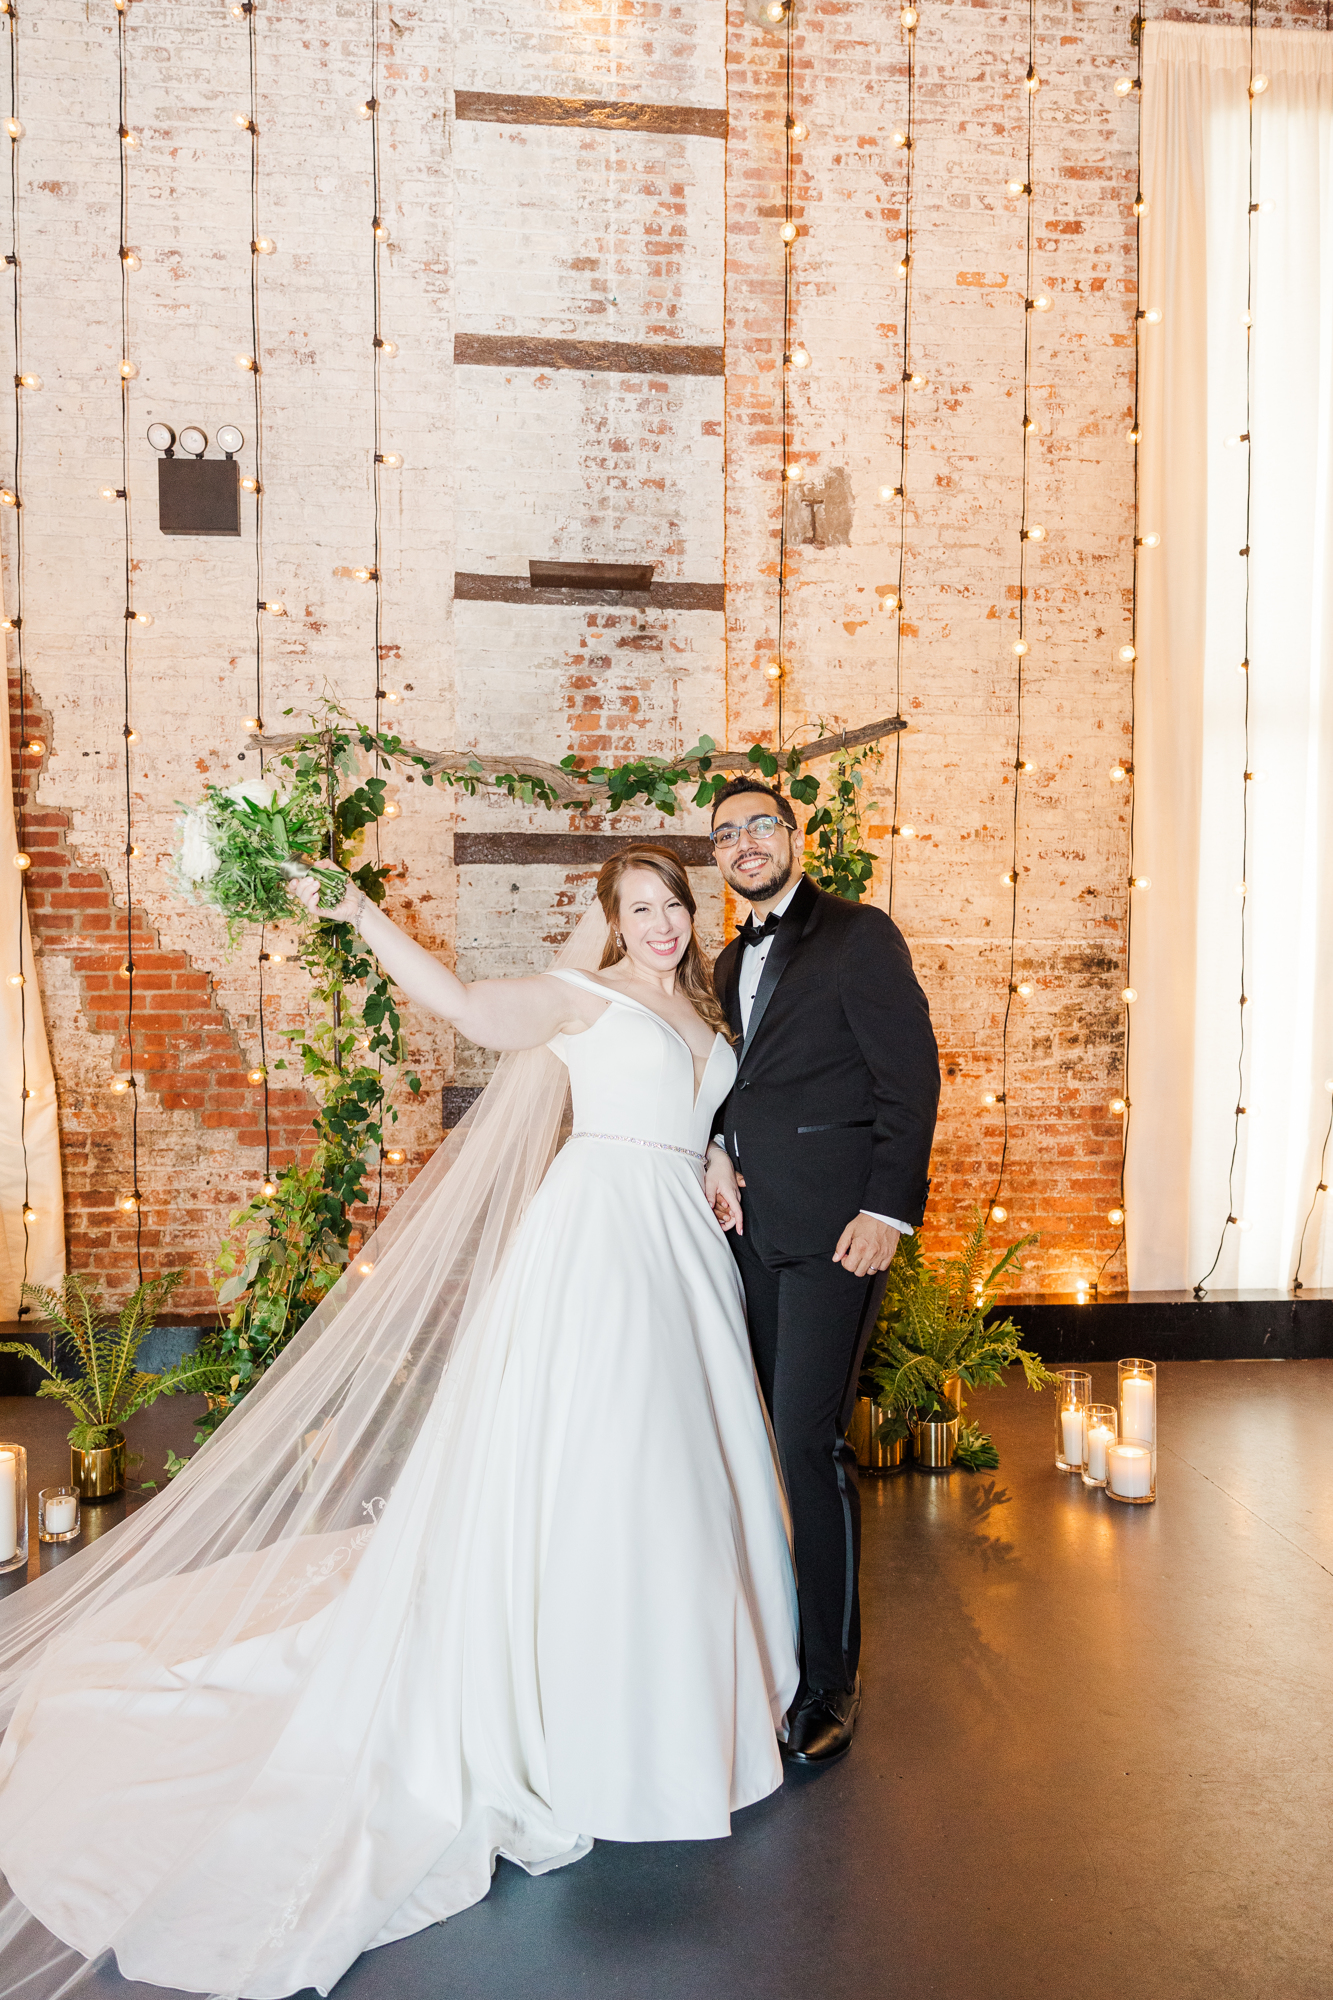 Stunning Green Building Wedding Photography with Rustic Elements